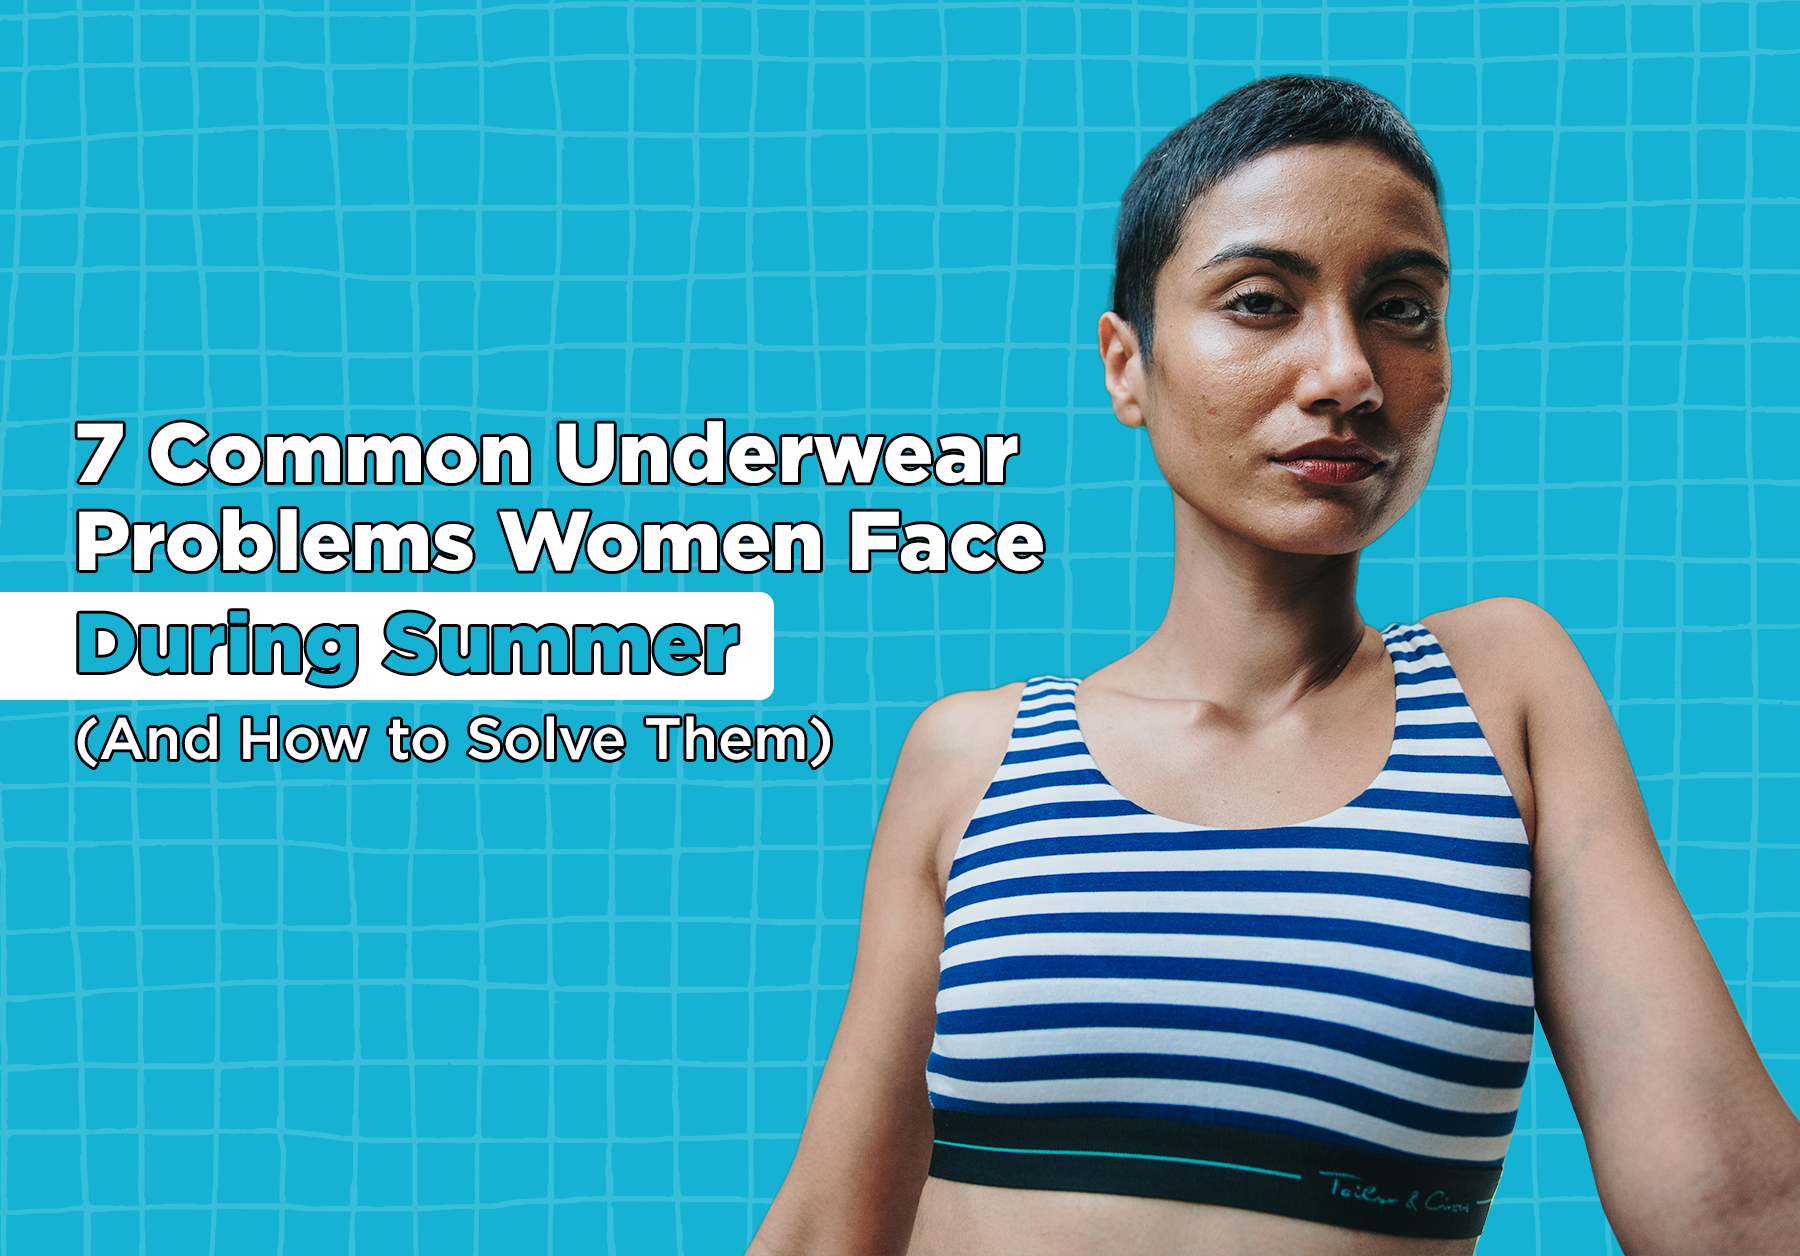 7 Common Underwear Problems Women Face During Summer (And How to Solve Them)